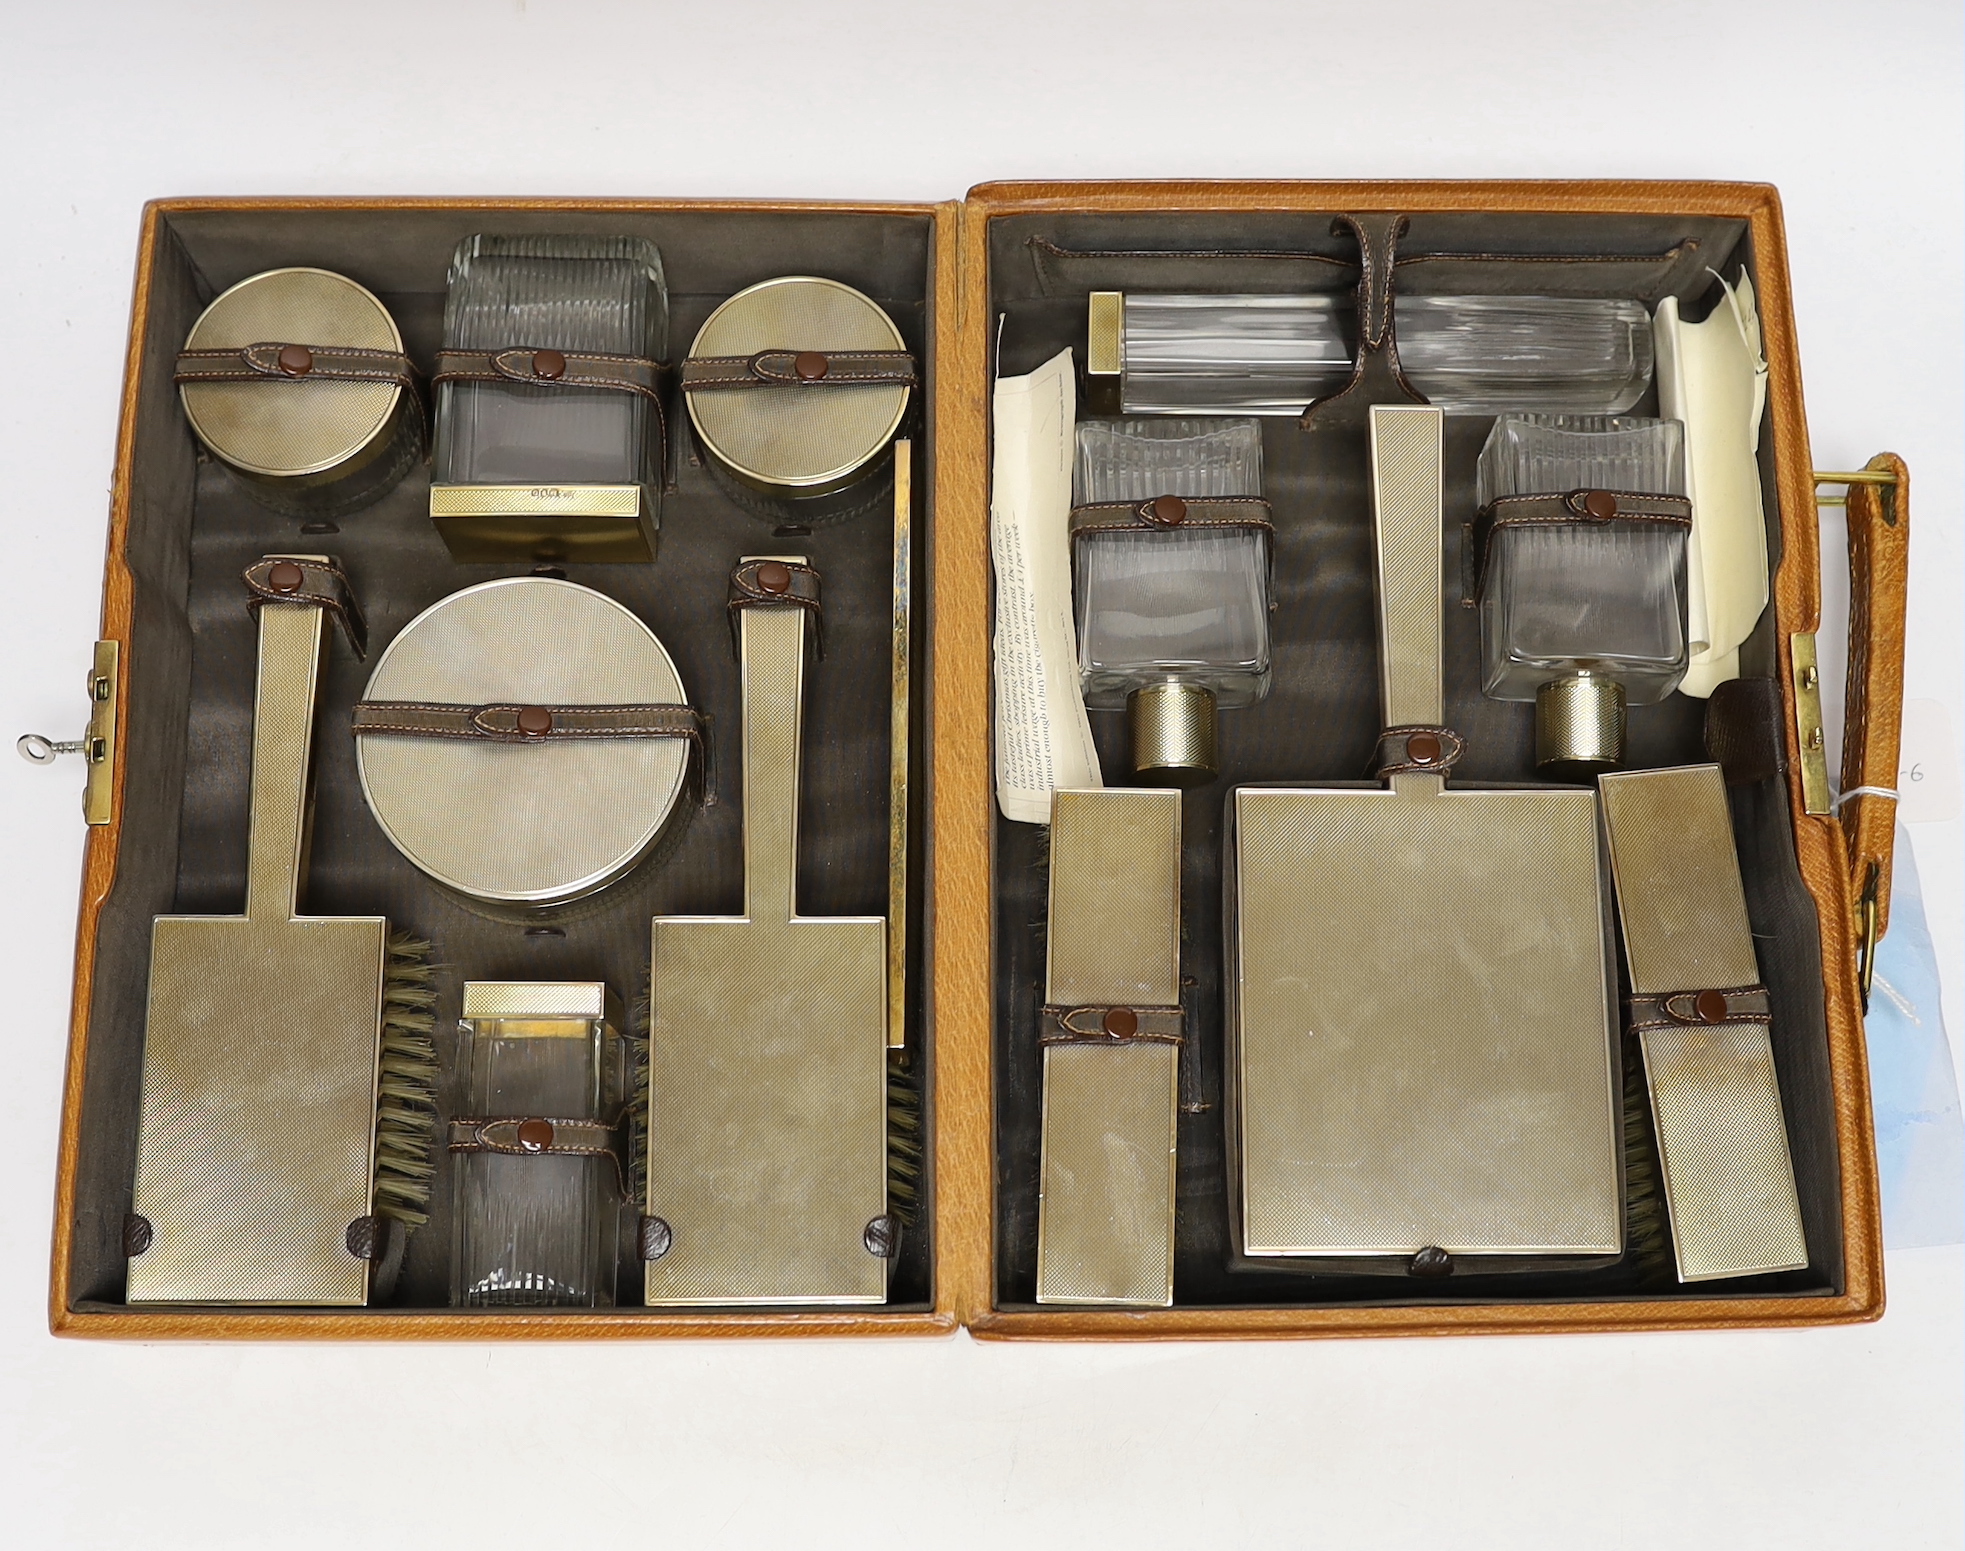 A George VI pig skin travelling vanity case, containing fourteen engine turned silver gilt mounted accoutrements, including toilet jars, mirror and brushes etc, Goldsmiths & Silversmiths Co Ltd, London, 1947/8/9, case 32